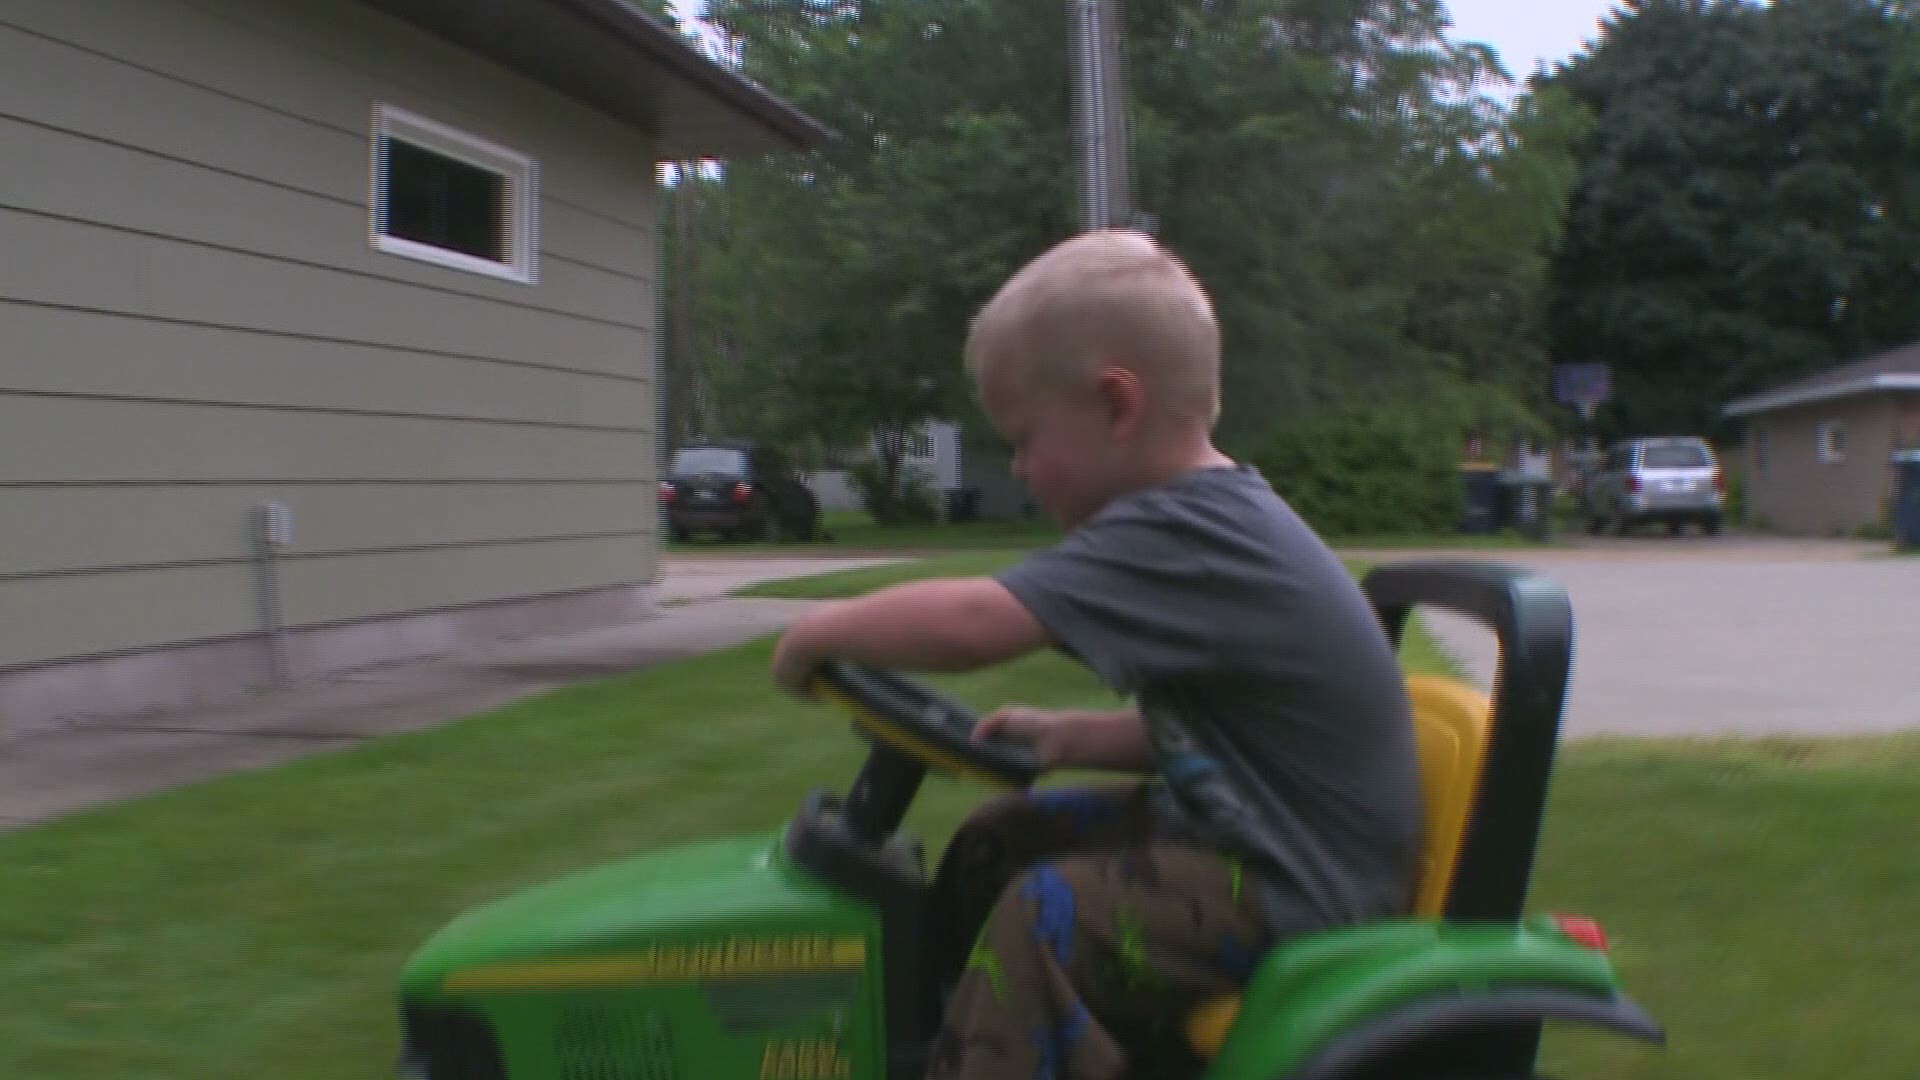 Originally aired July 2014. Emmett and Erling are the best of friends despite their age difference. KARE 11's Boyd Huppert shares their story.